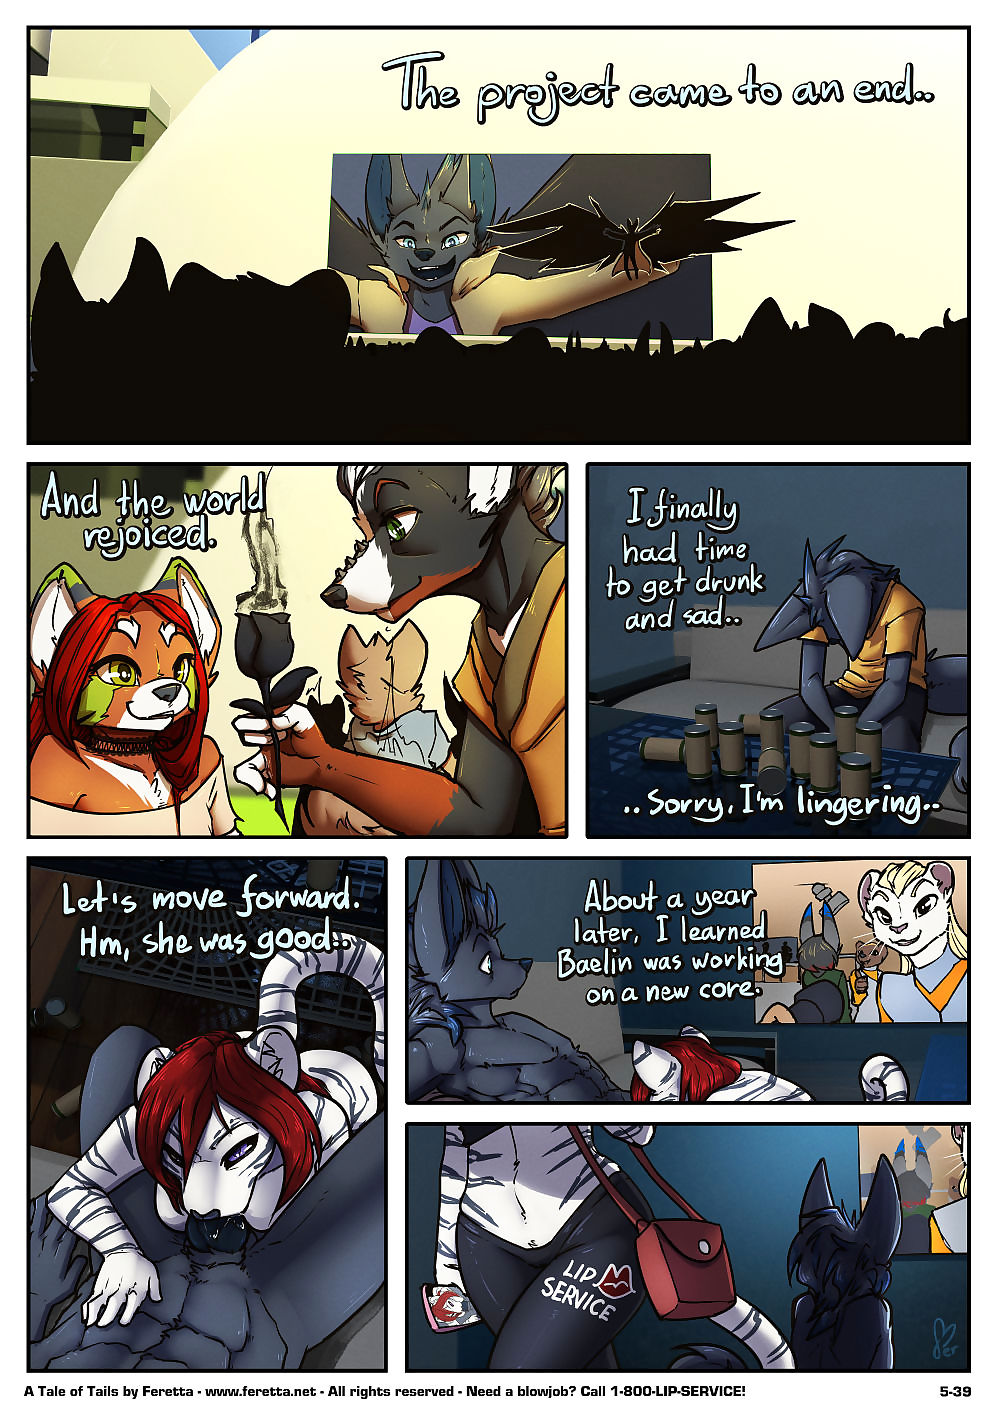 A Tale of Tails: Chapter 5 - A World of Hurt - part 2